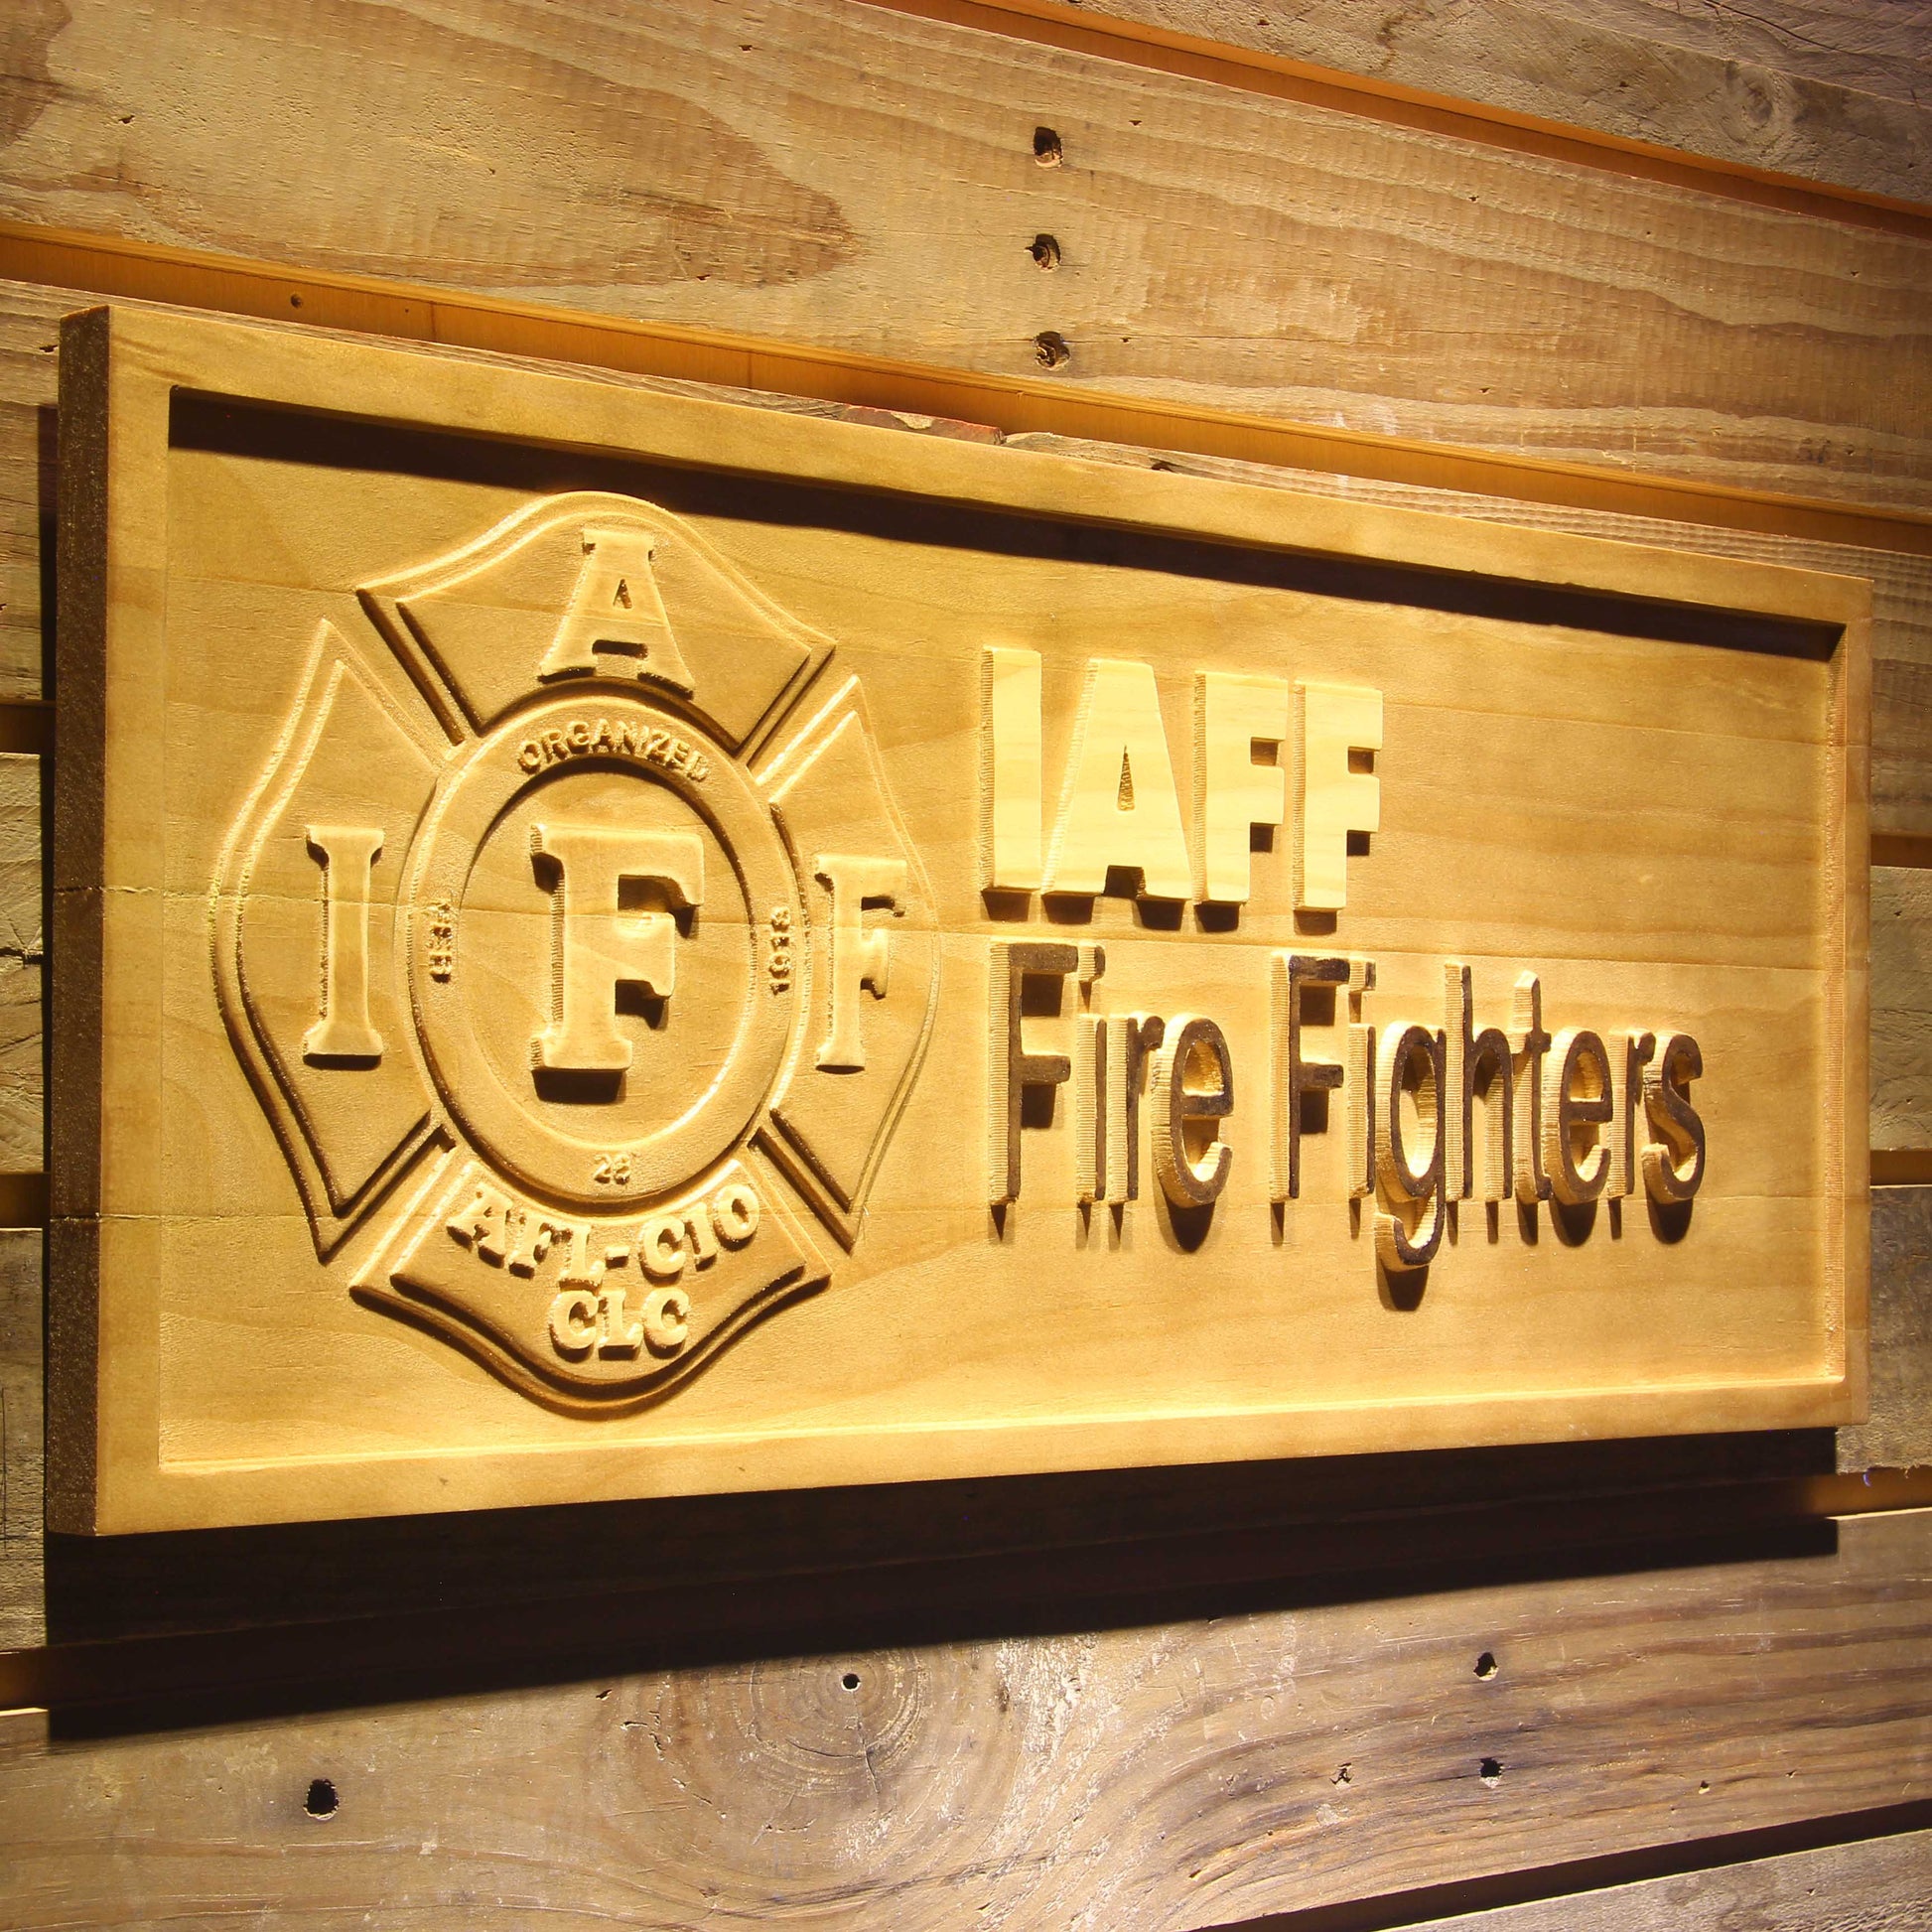 IAFF Fire Fighters Fireman  3D Wooden Bar Signs by Woody Signs Co. - Handmade Crafted Unique Wooden Creative